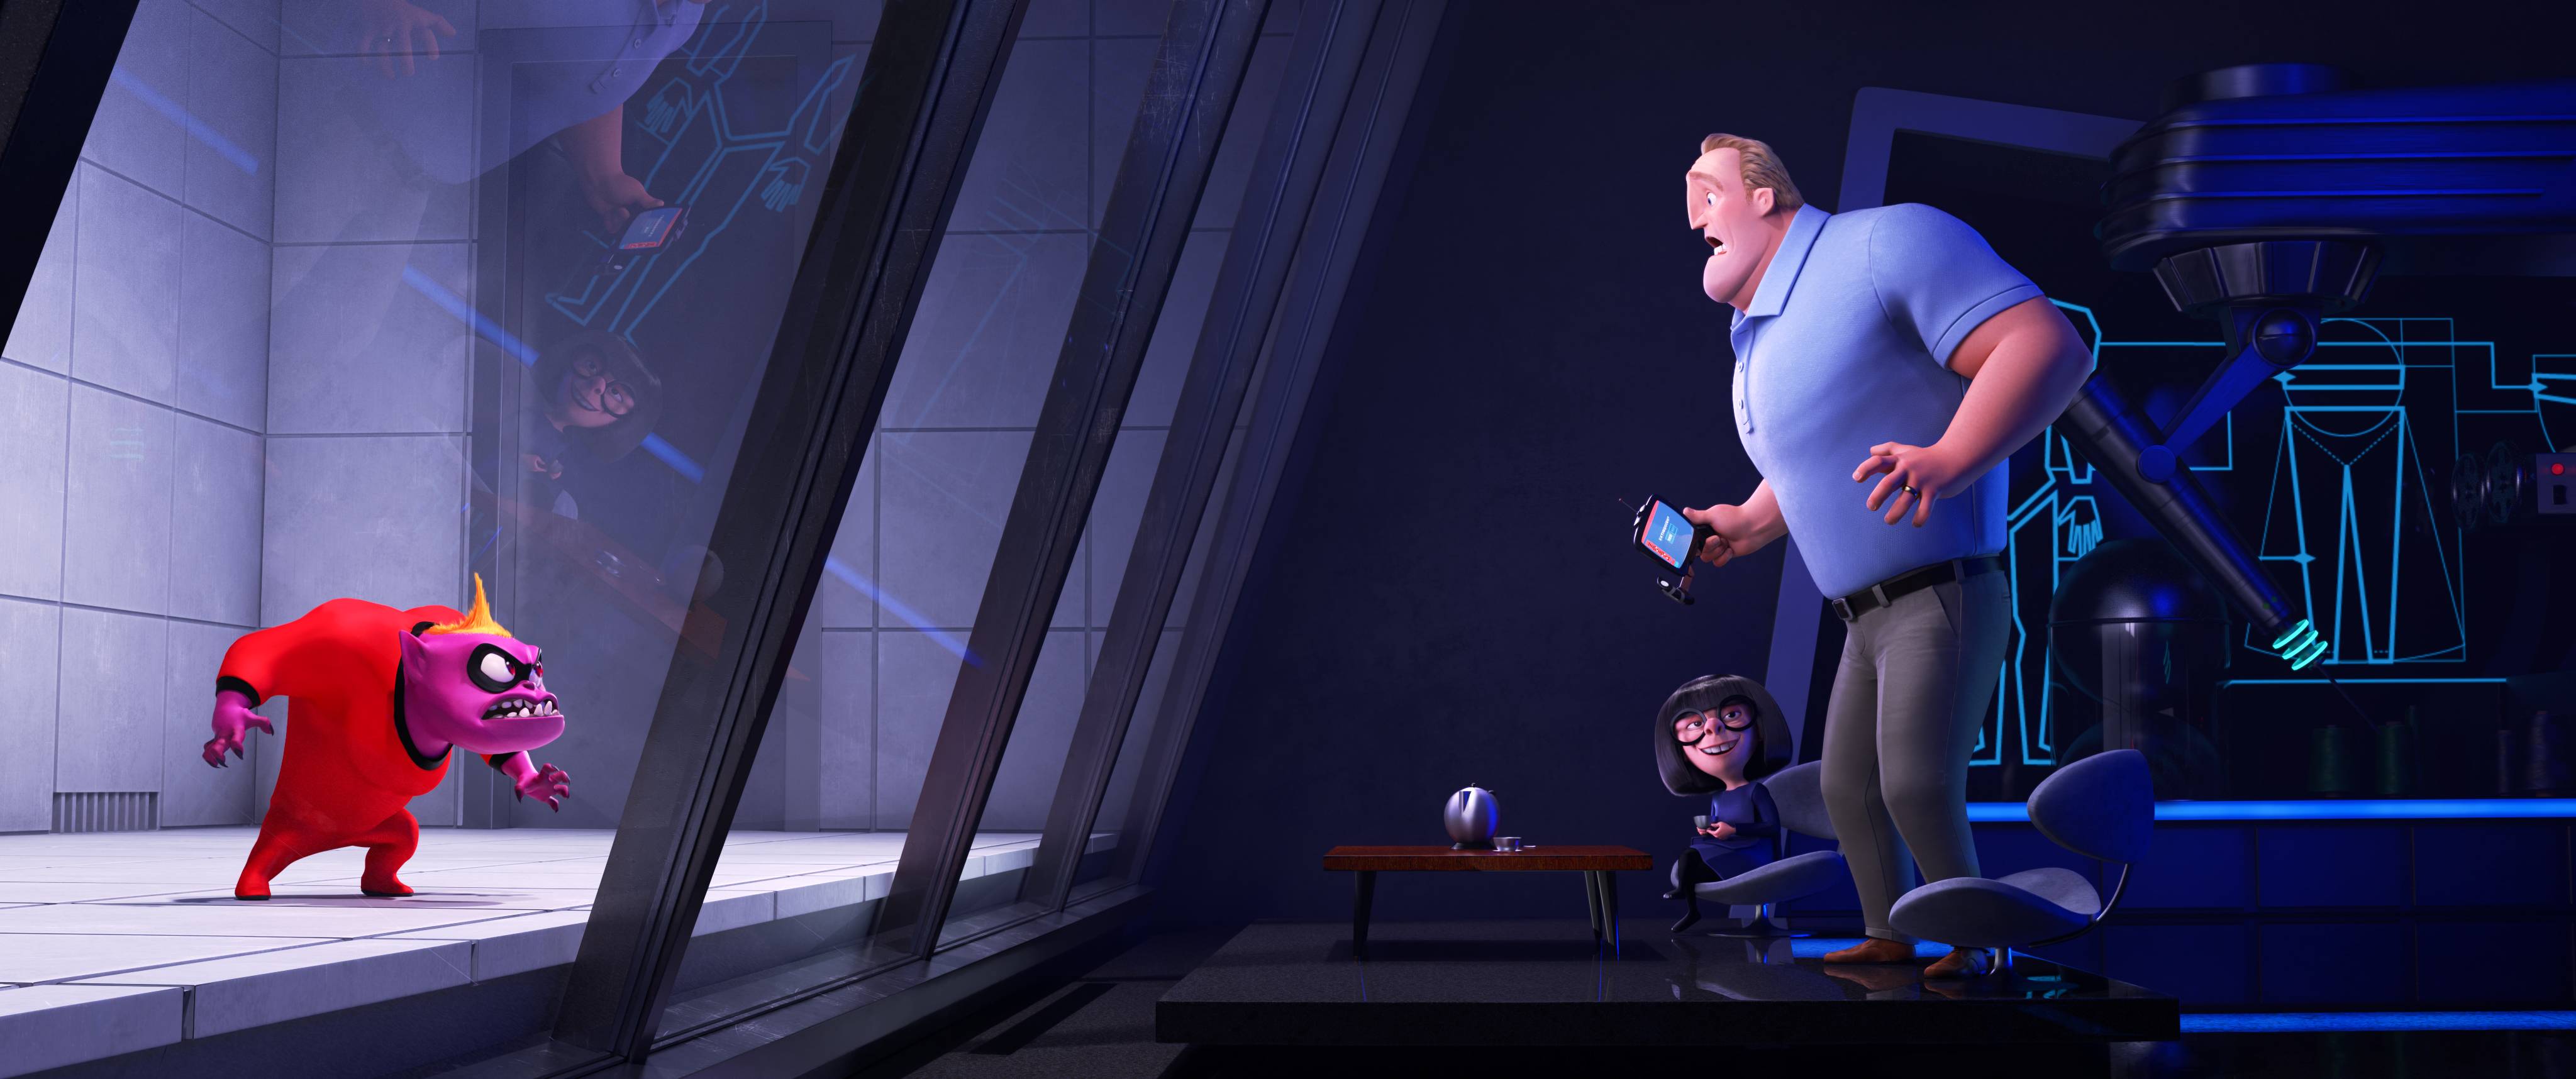 Incredibles 2: Collection of New Official Image in HQ